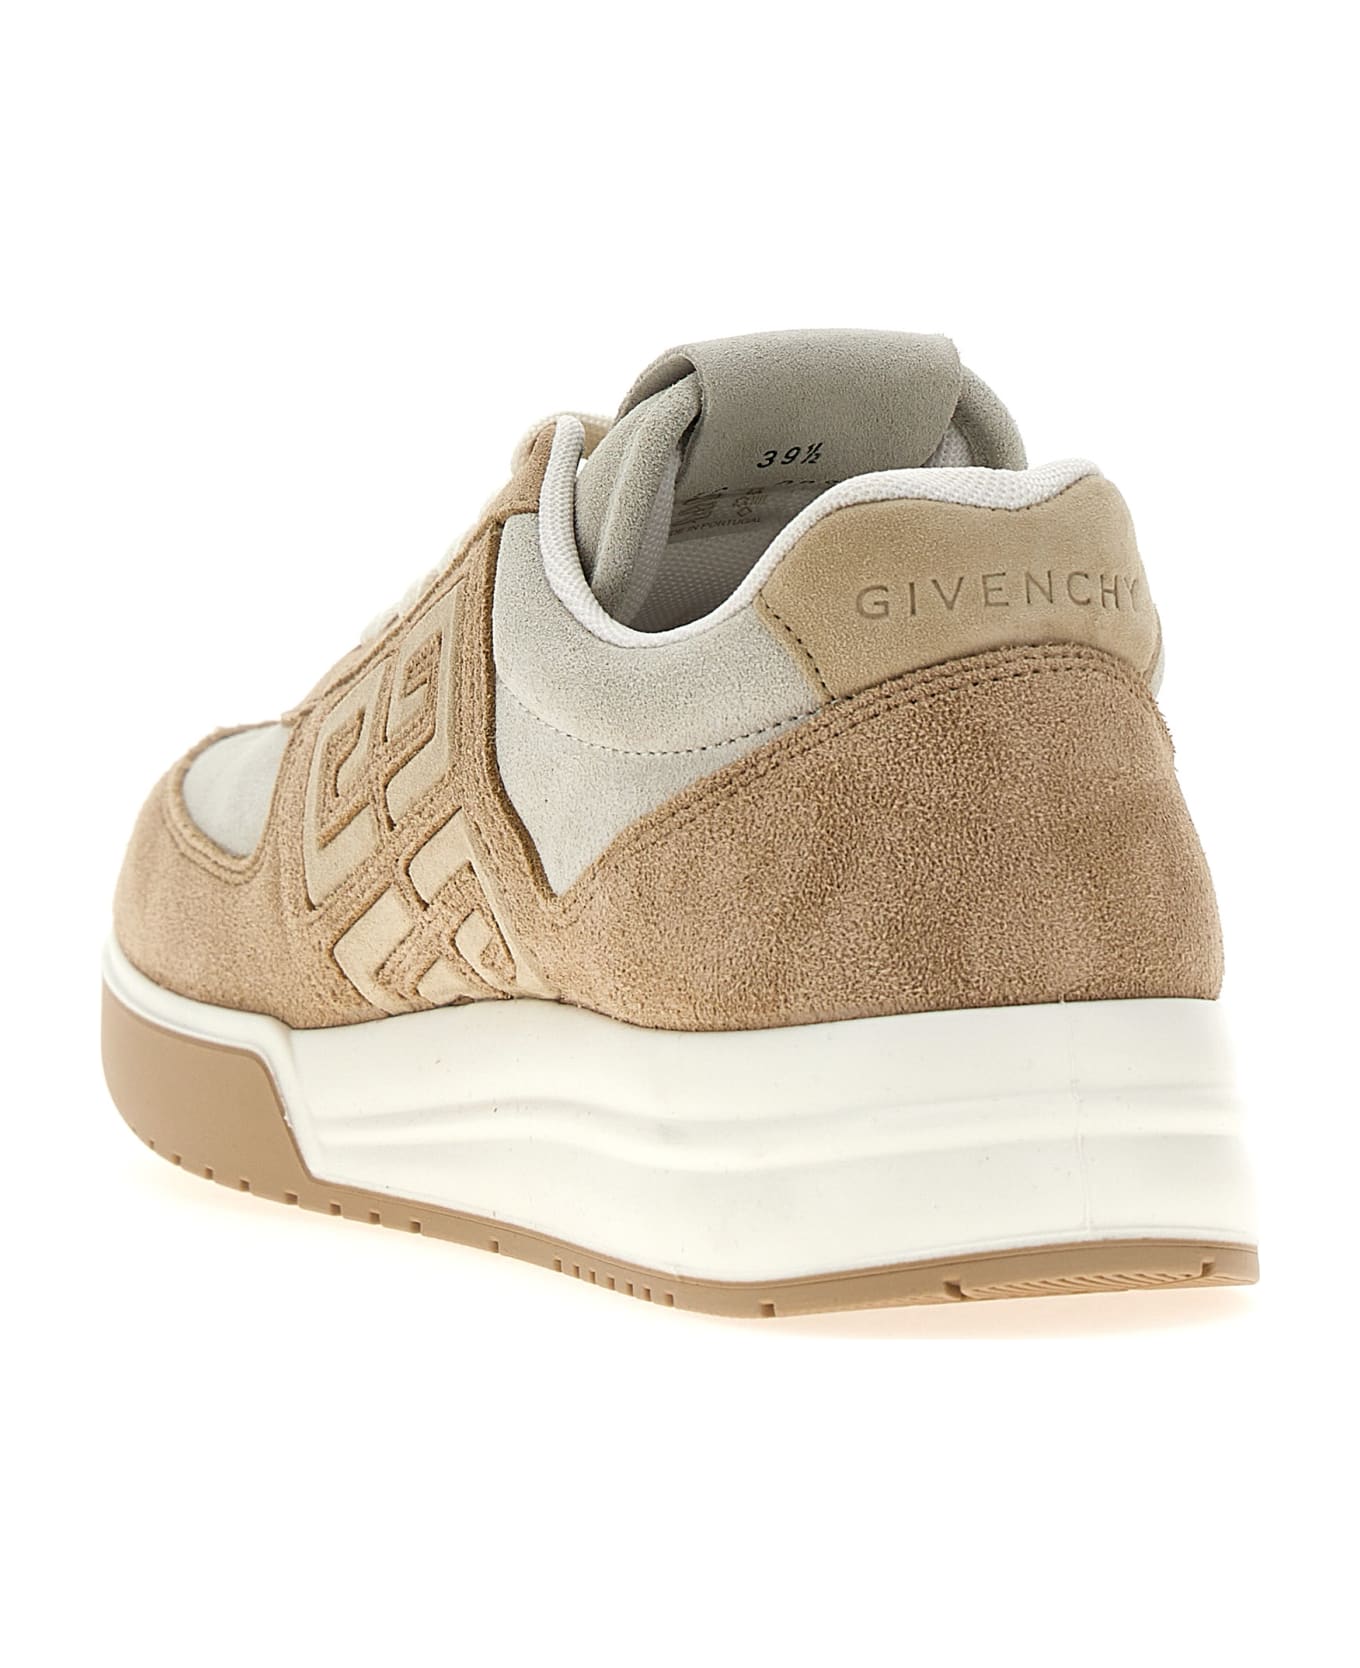 Givenchy G4 Low Sneakers - BEIGE/WHITE